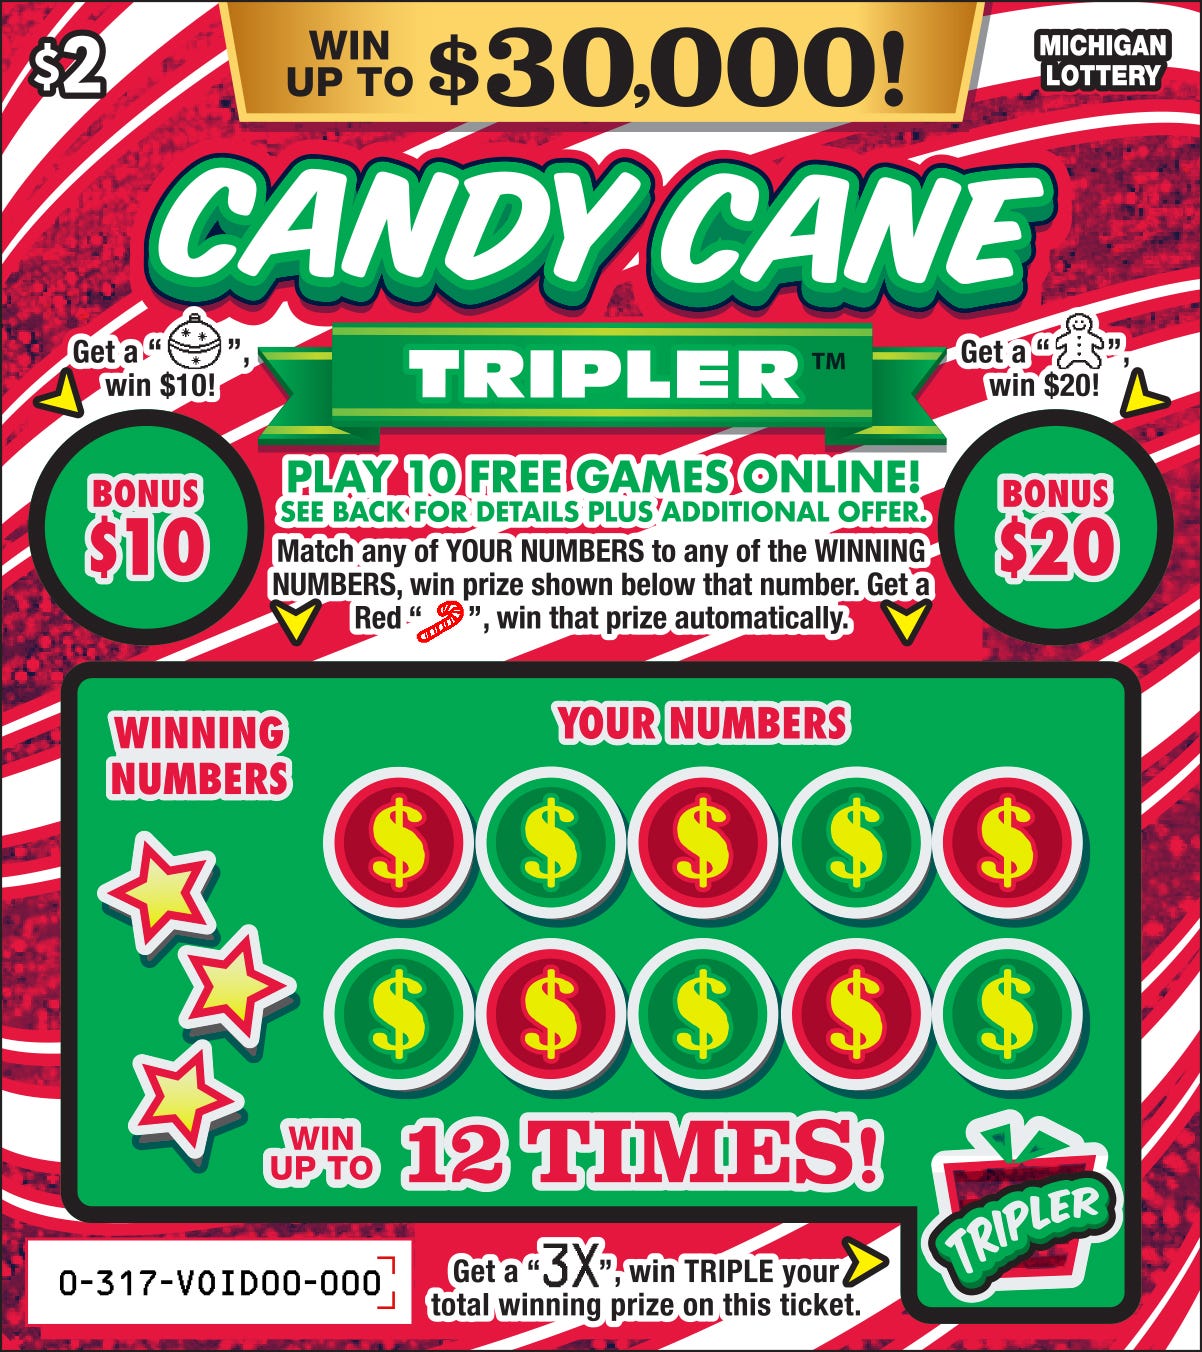 Michigan Lottery 4 New Holiday Themed Instant Scratch Off Games